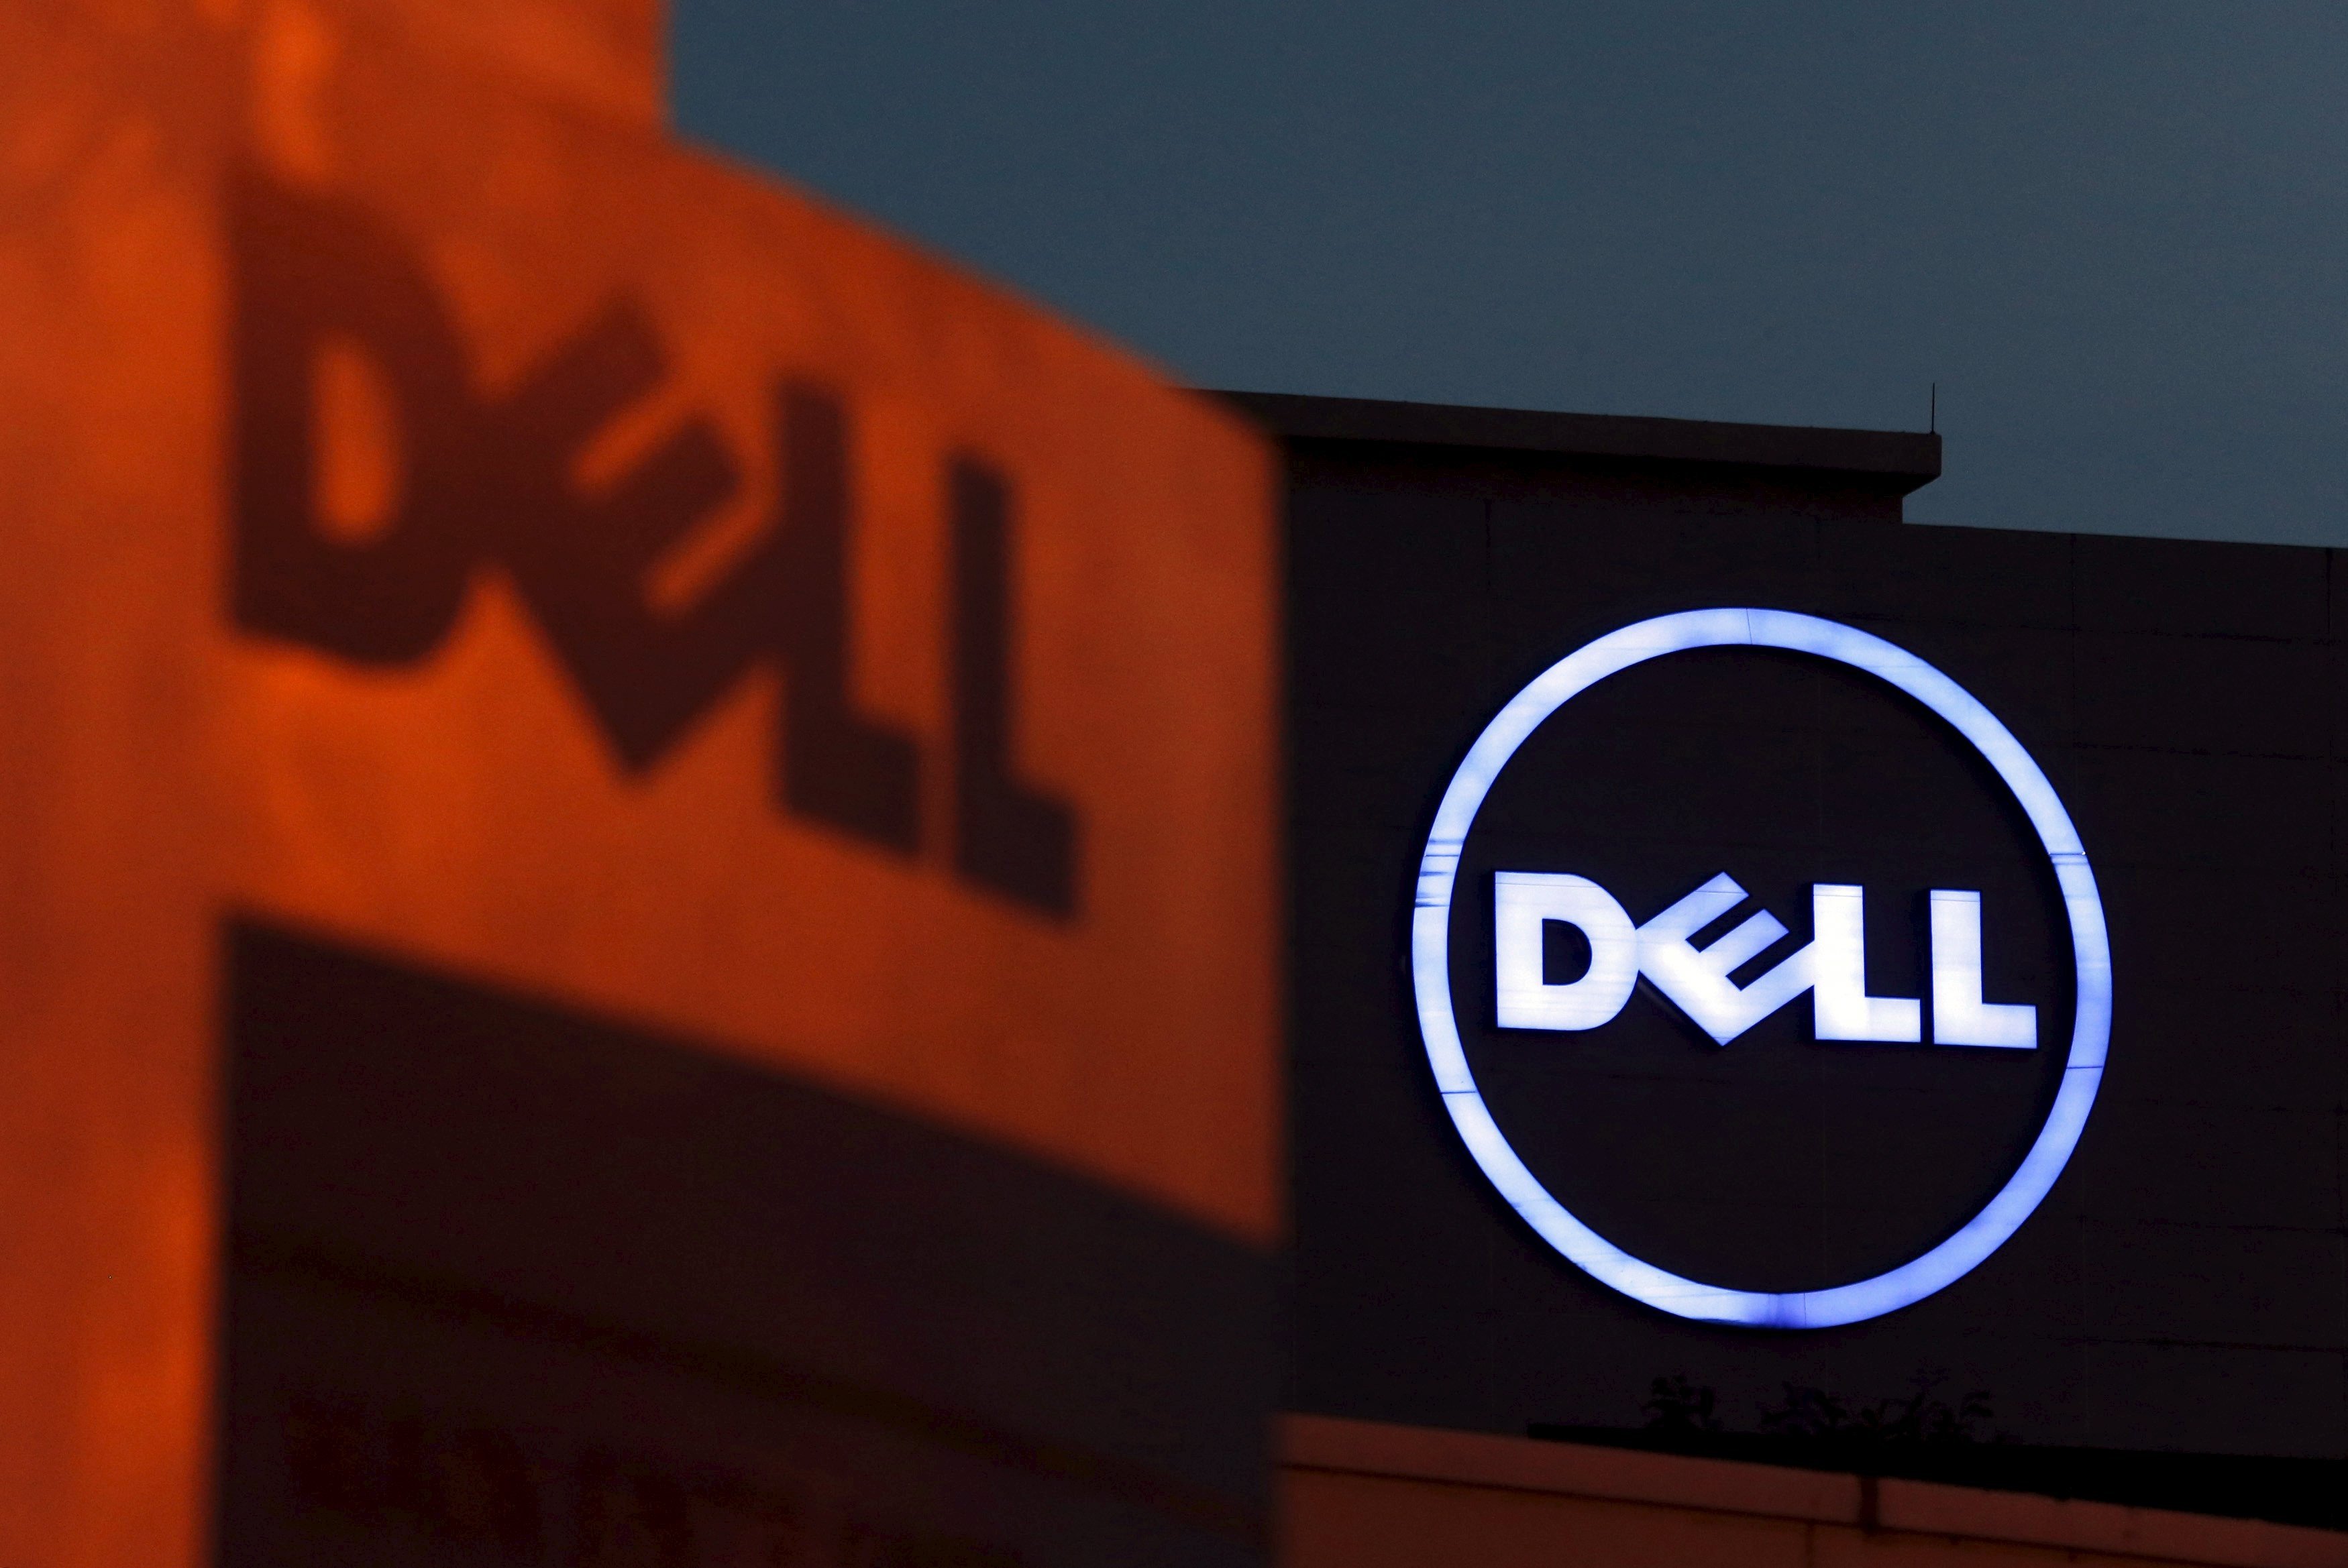 The deal would give Dell shareholders a way to profit from having taken Dell private in 2013 and help pay off some debt